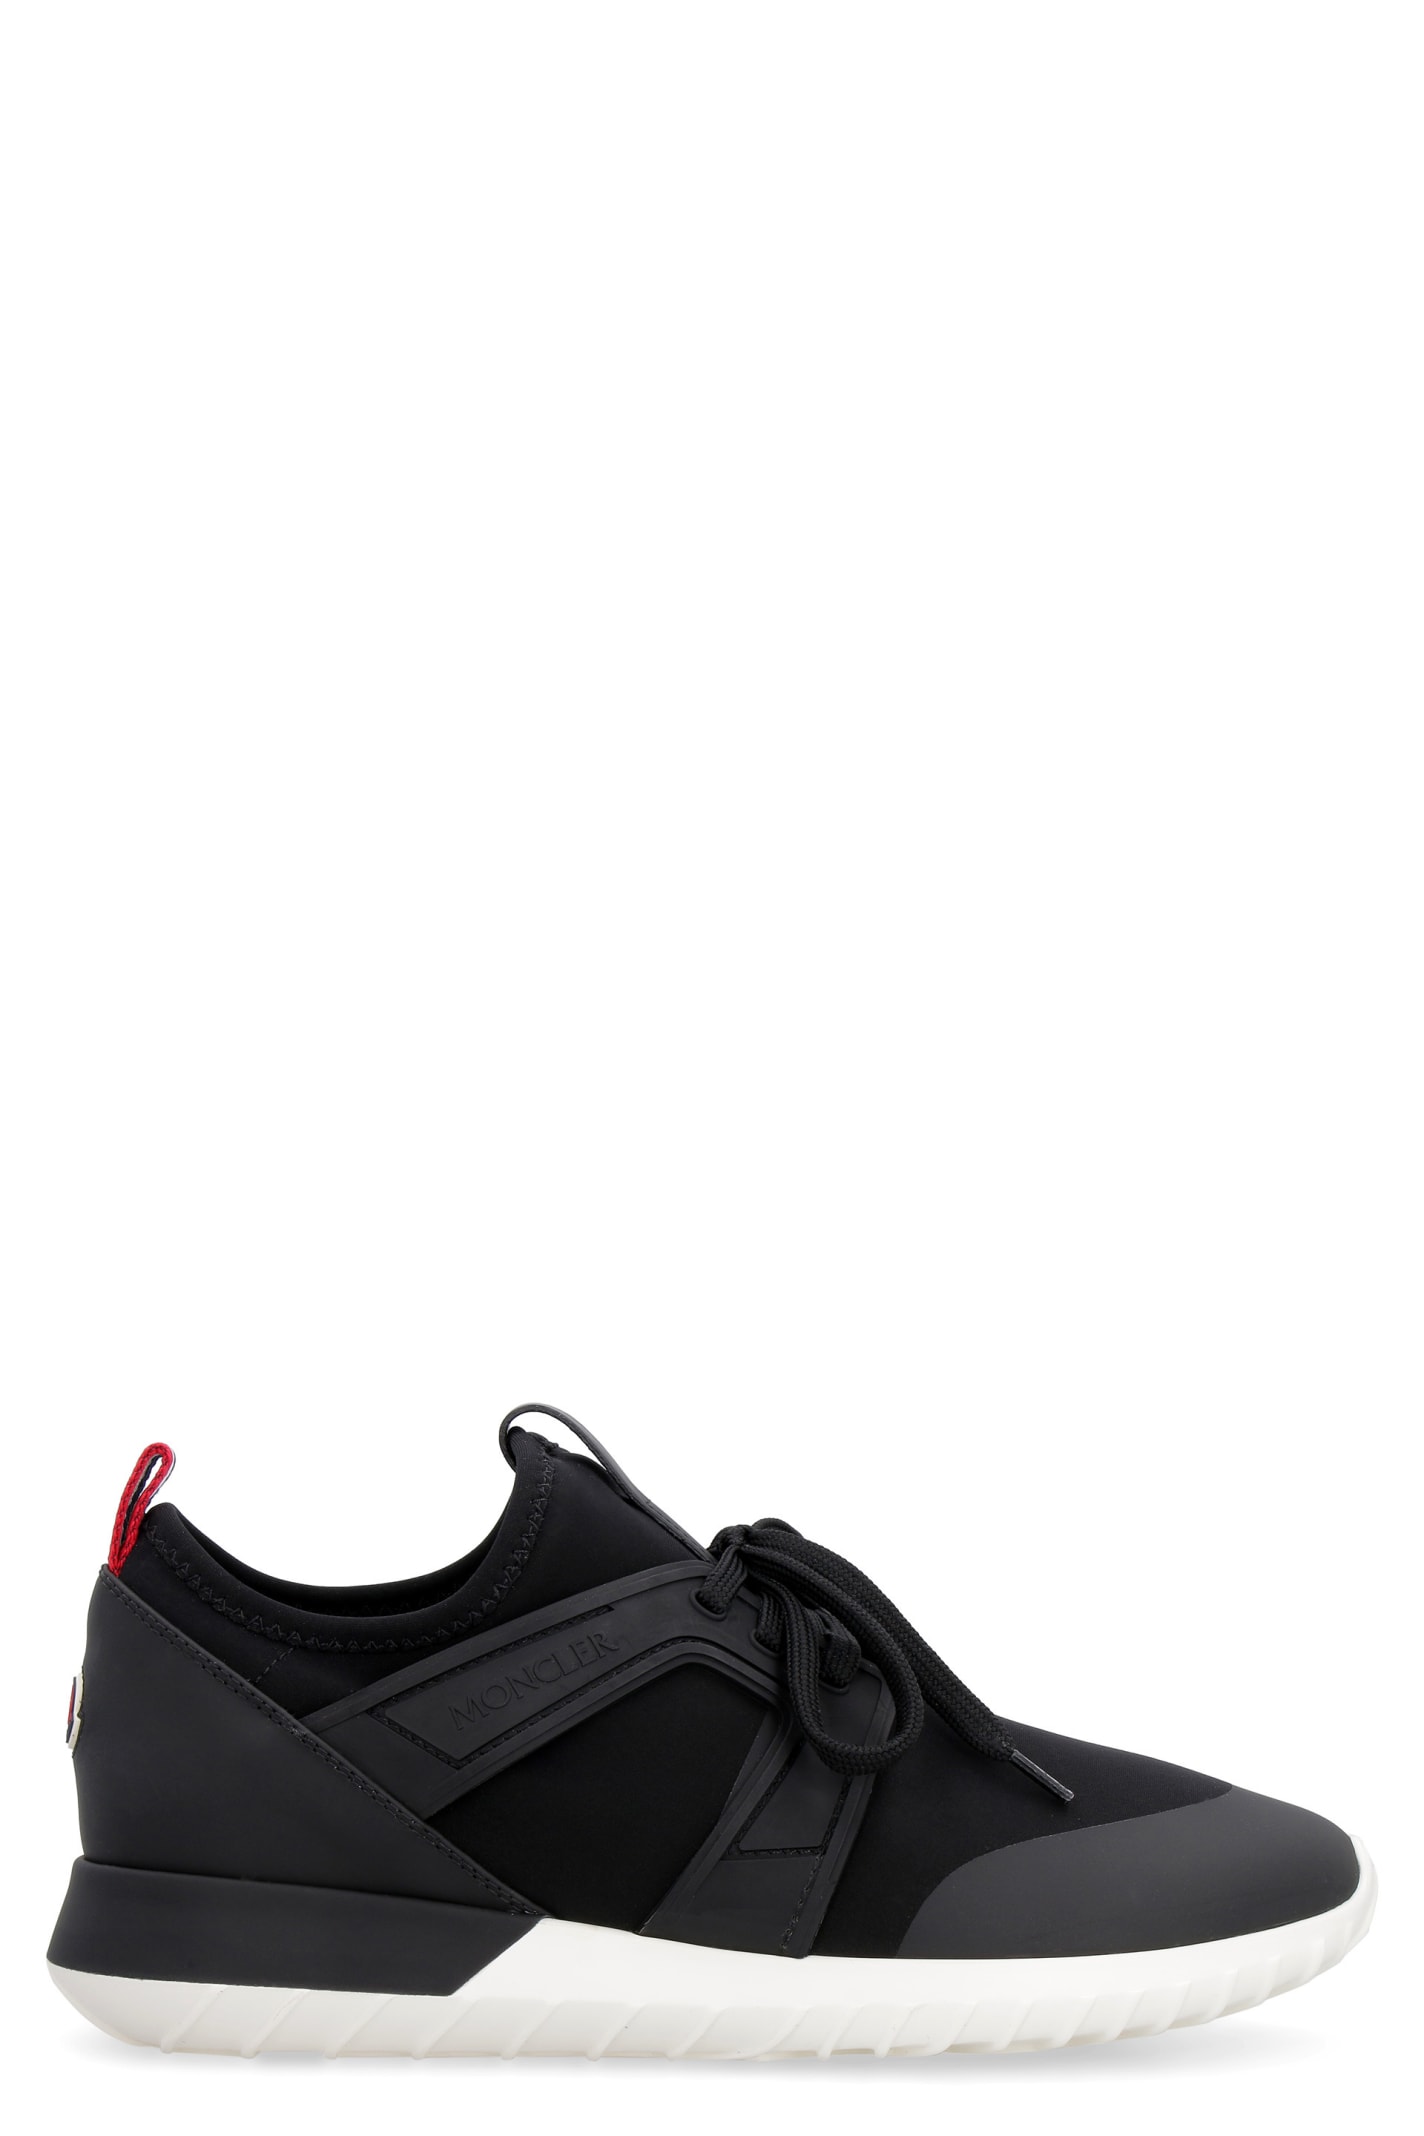 Buy Moncler Meline Techno Fabric And Leather Sneakers online, shop Moncler shoes with free shipping